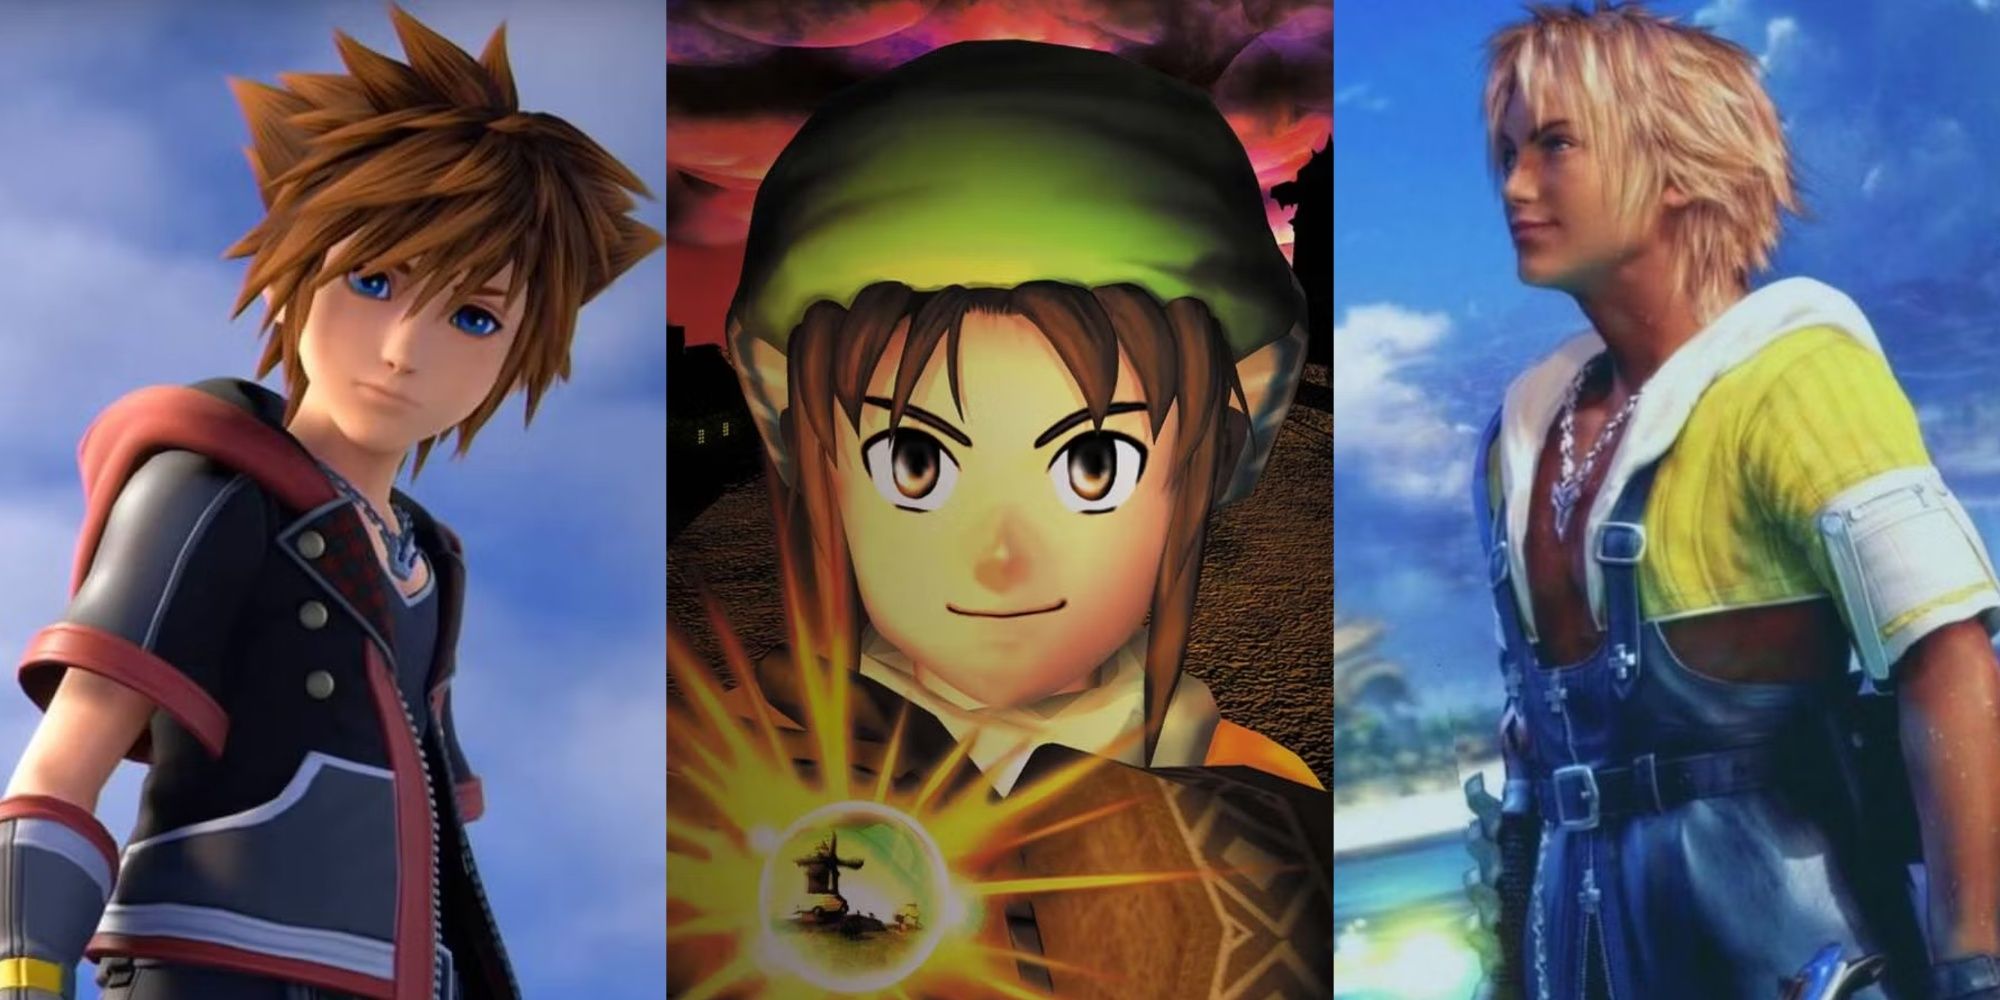 Feature image of Kingdom Hearts, Dark Cloud, Final Fantasy 10 protagonists